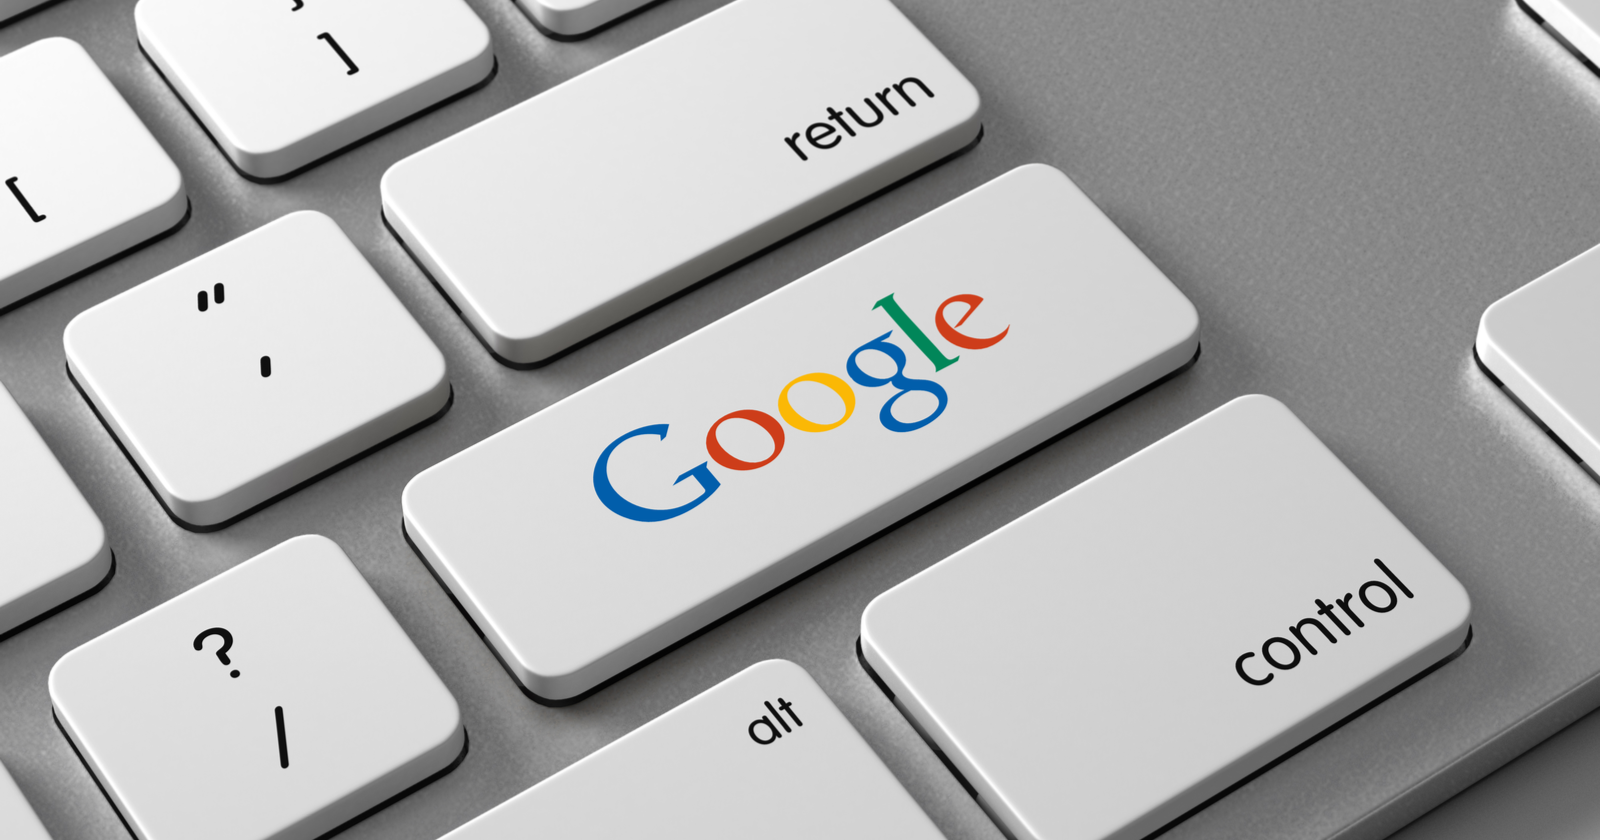 Google’s Q1 Earnings Are In – But What Was The Miss? via @sejournal, @mirandalmwrites